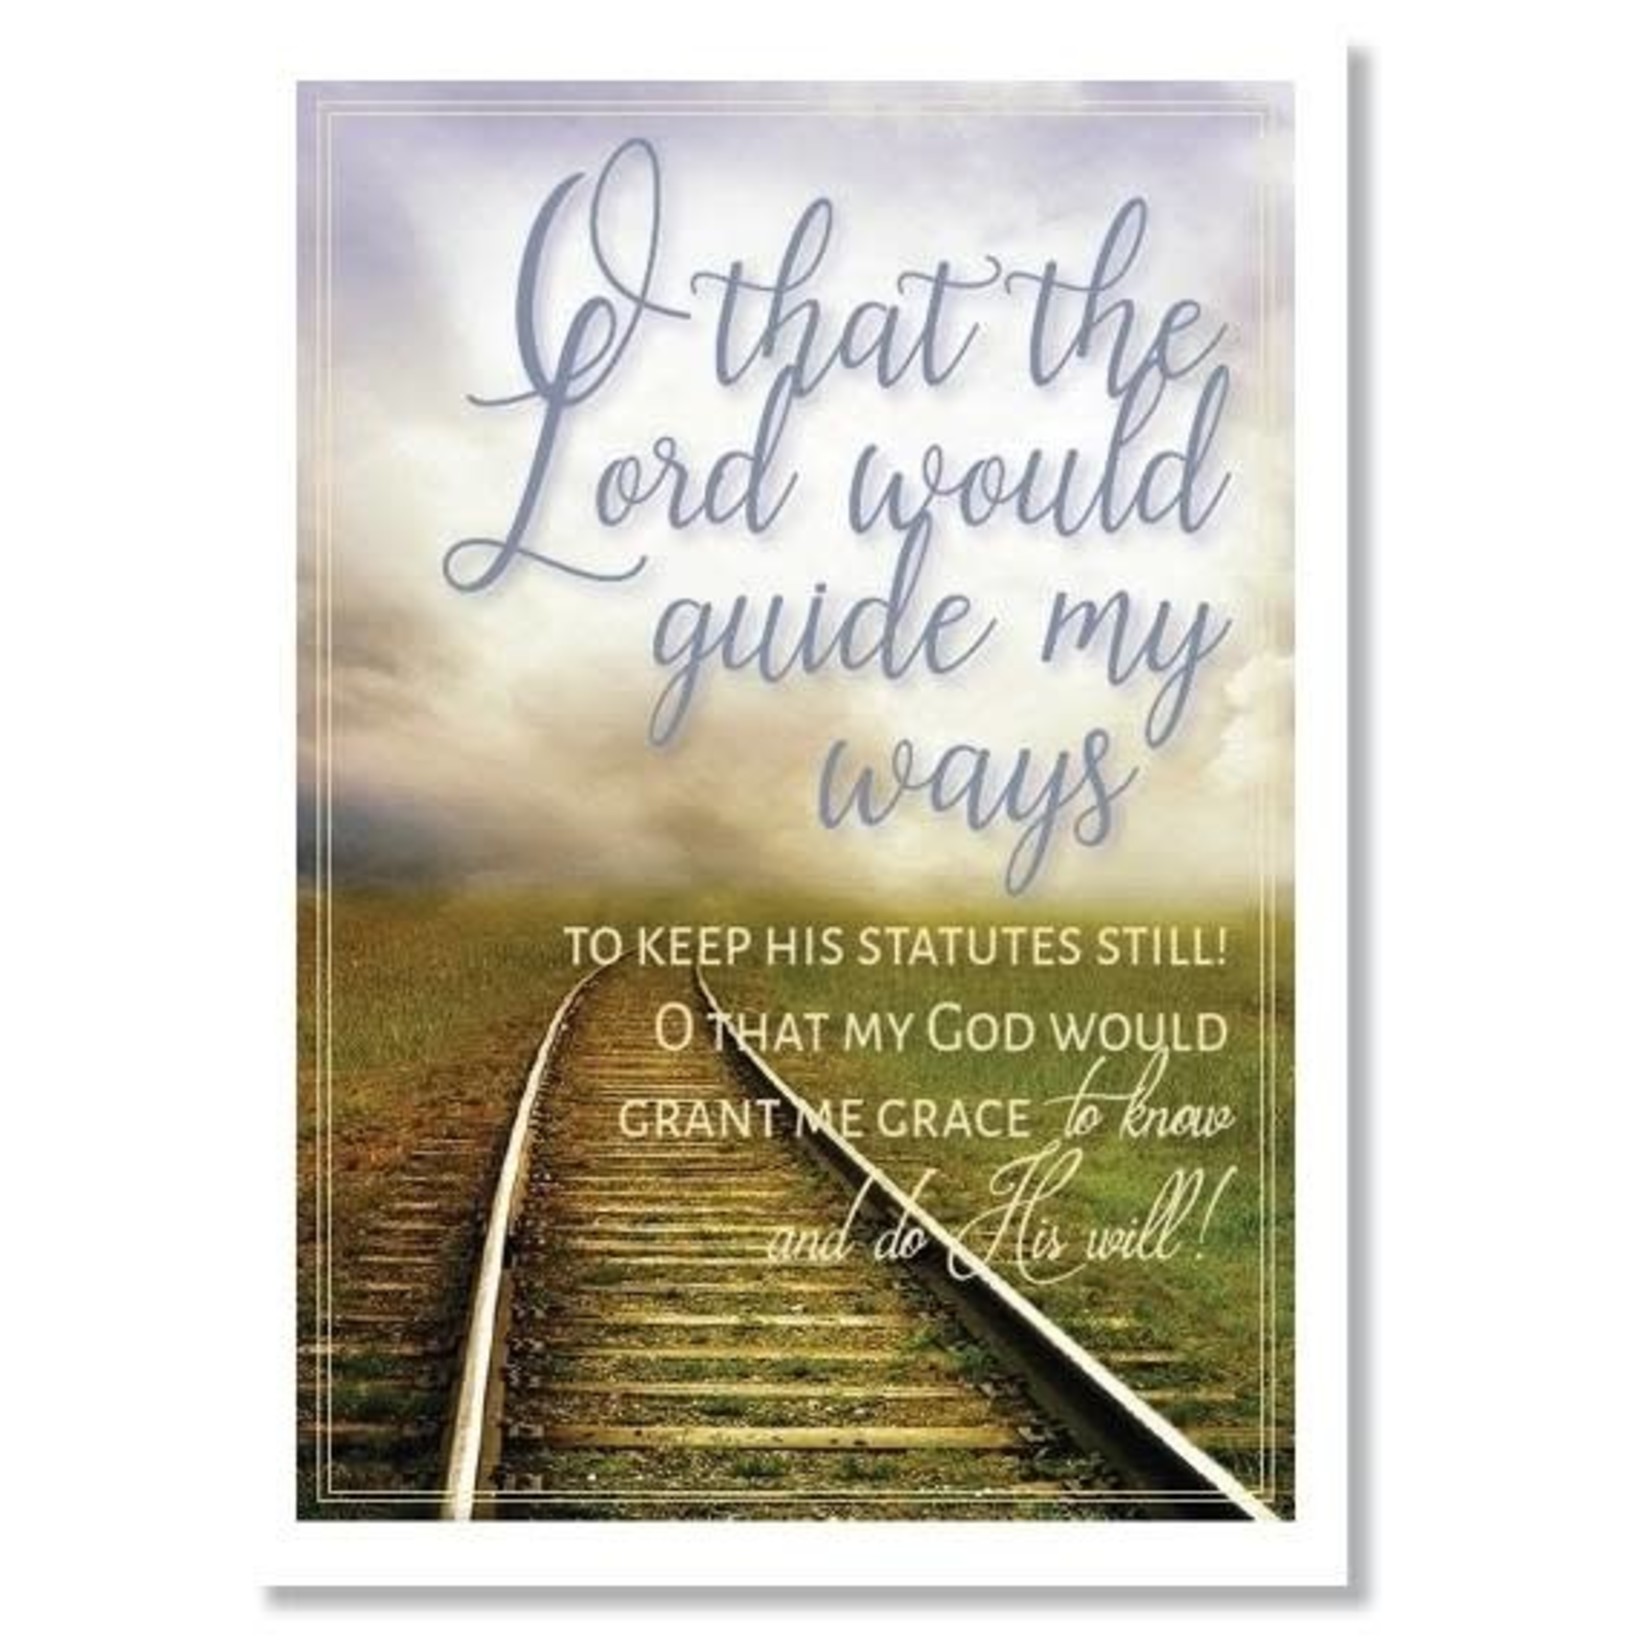 Hymns In My Heart - 5x7" Greeting Card - Thank You (Teacher) - O That The Lord Would Guide